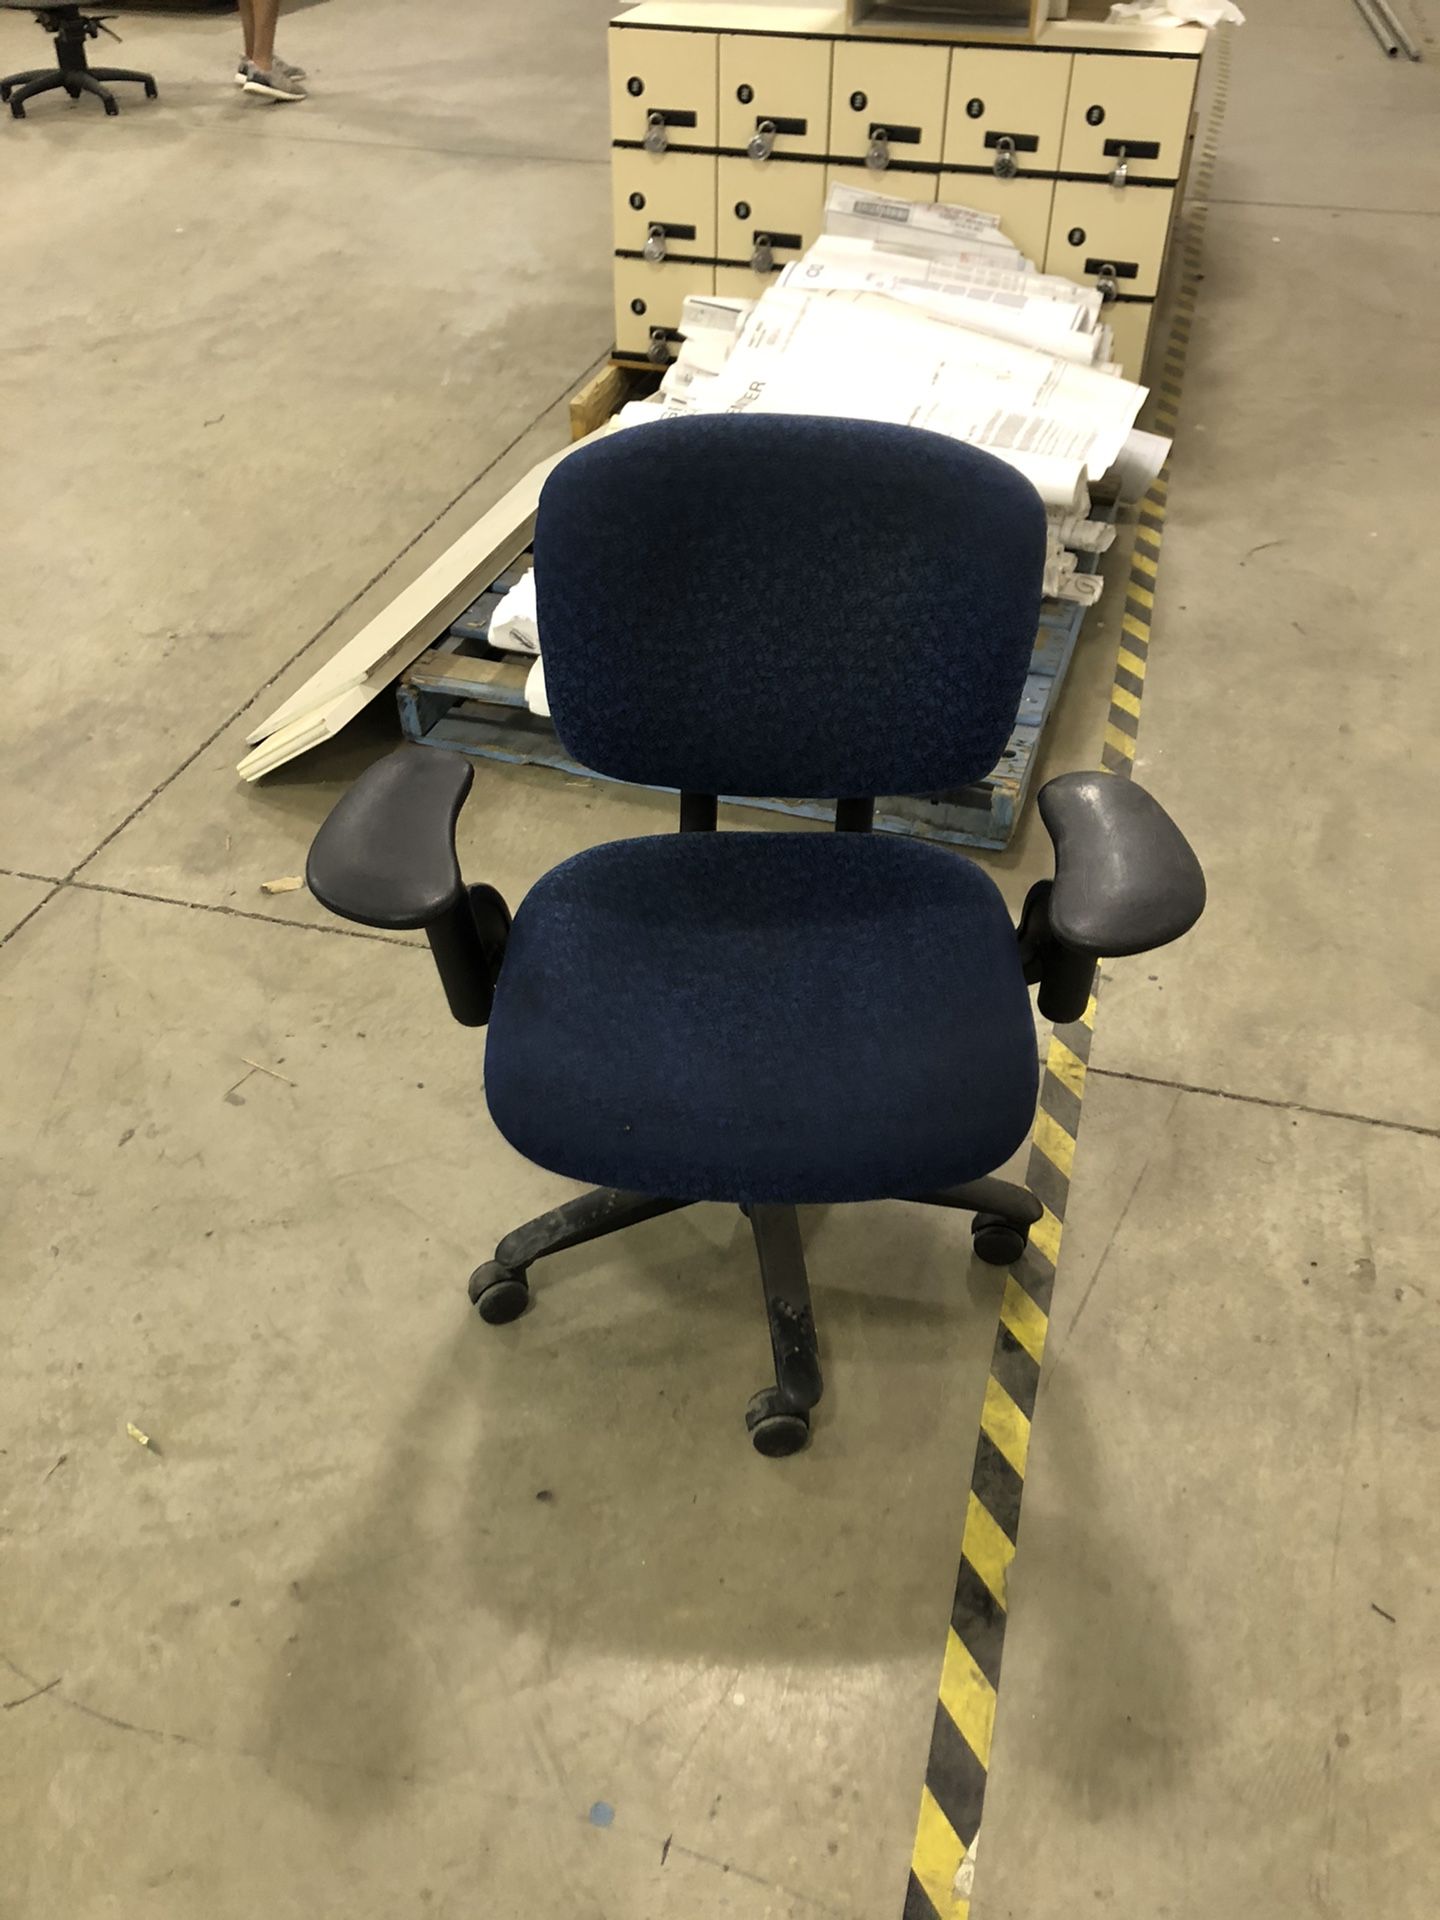 Blue office chairs